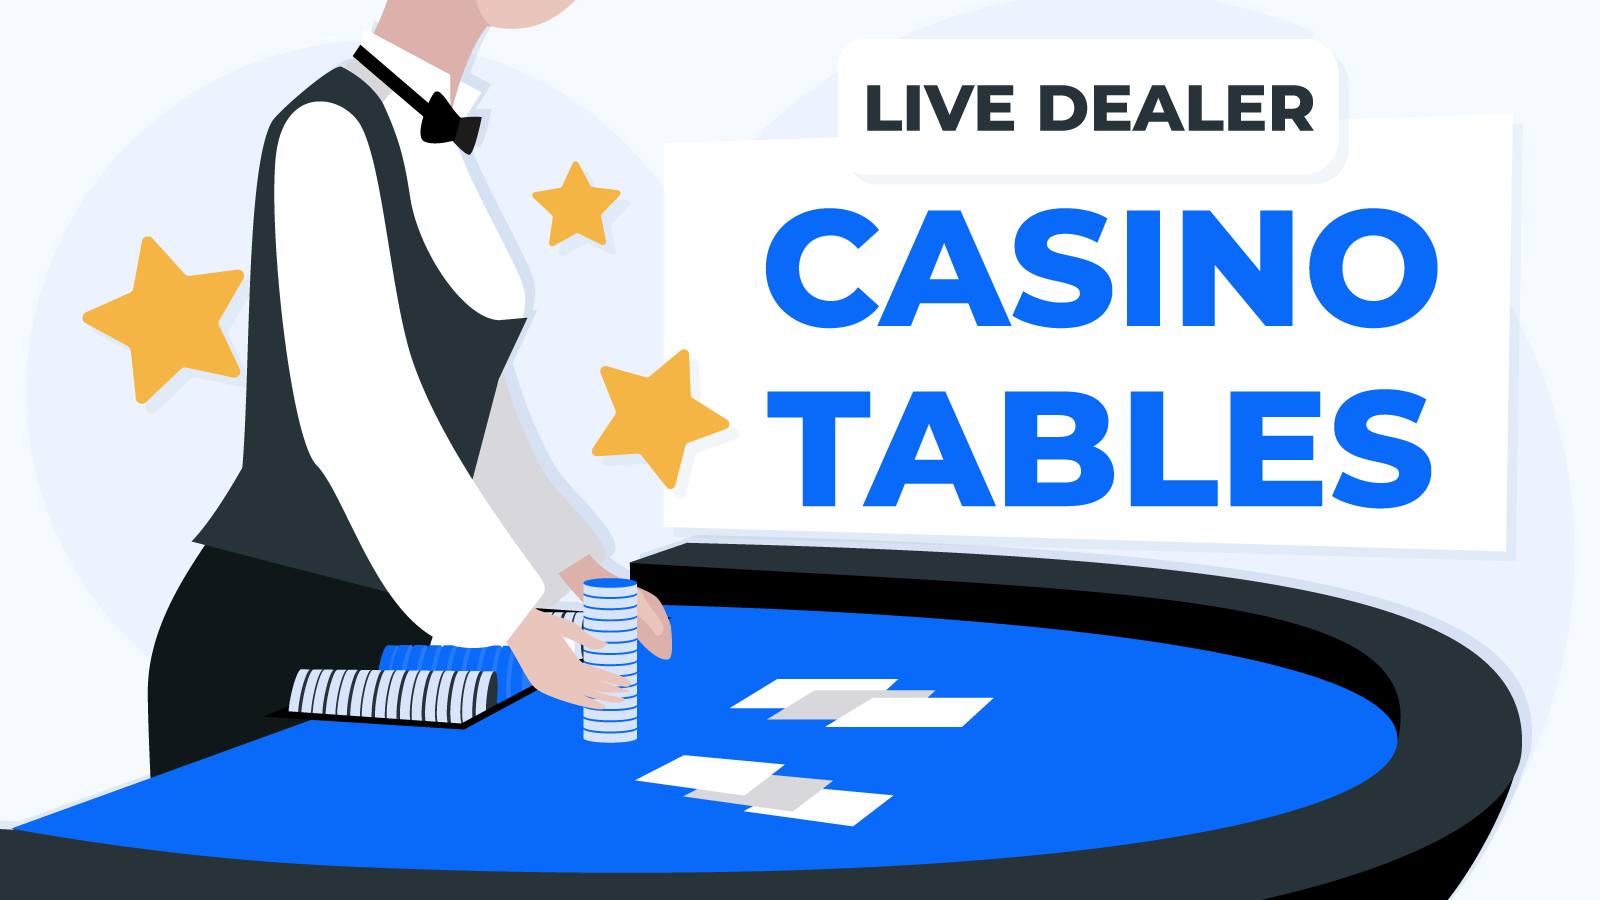 How to Access Exclusive Live Dealer Tables